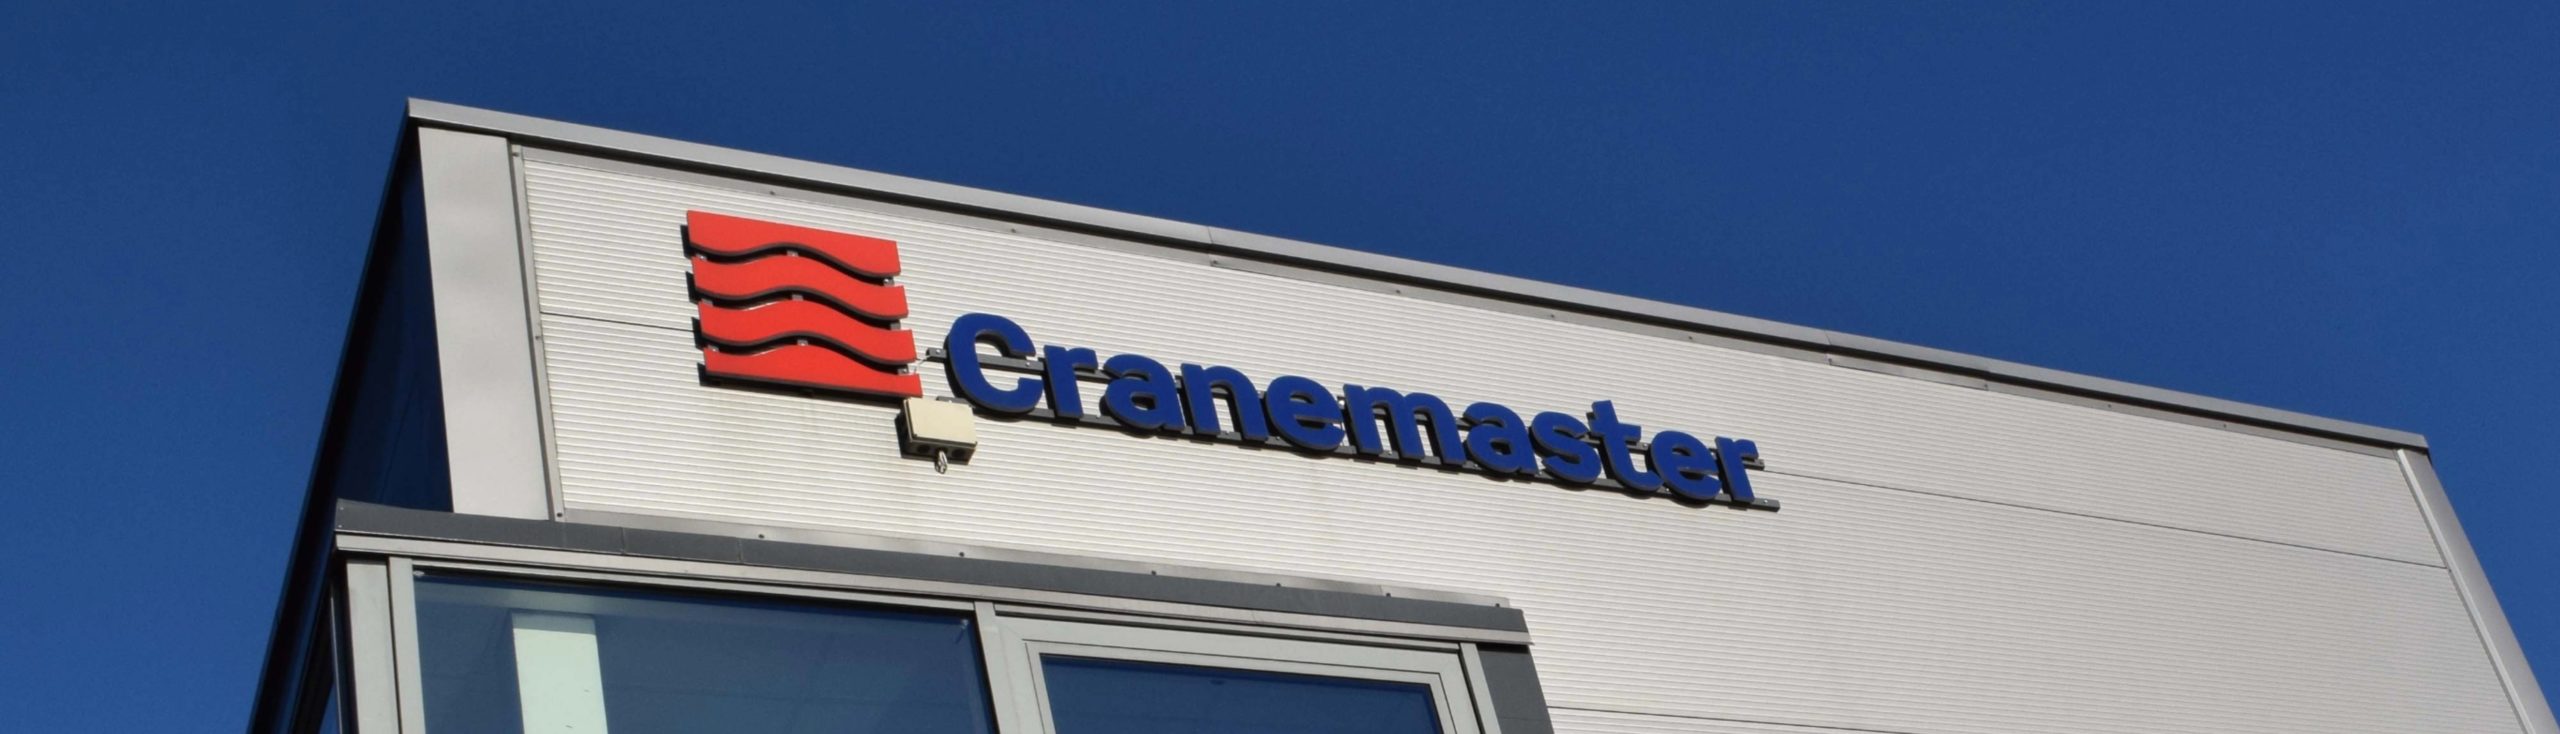 <strong>Celebrating our 40th anniversary with an official rebrand to Cranemaster AS</strong>